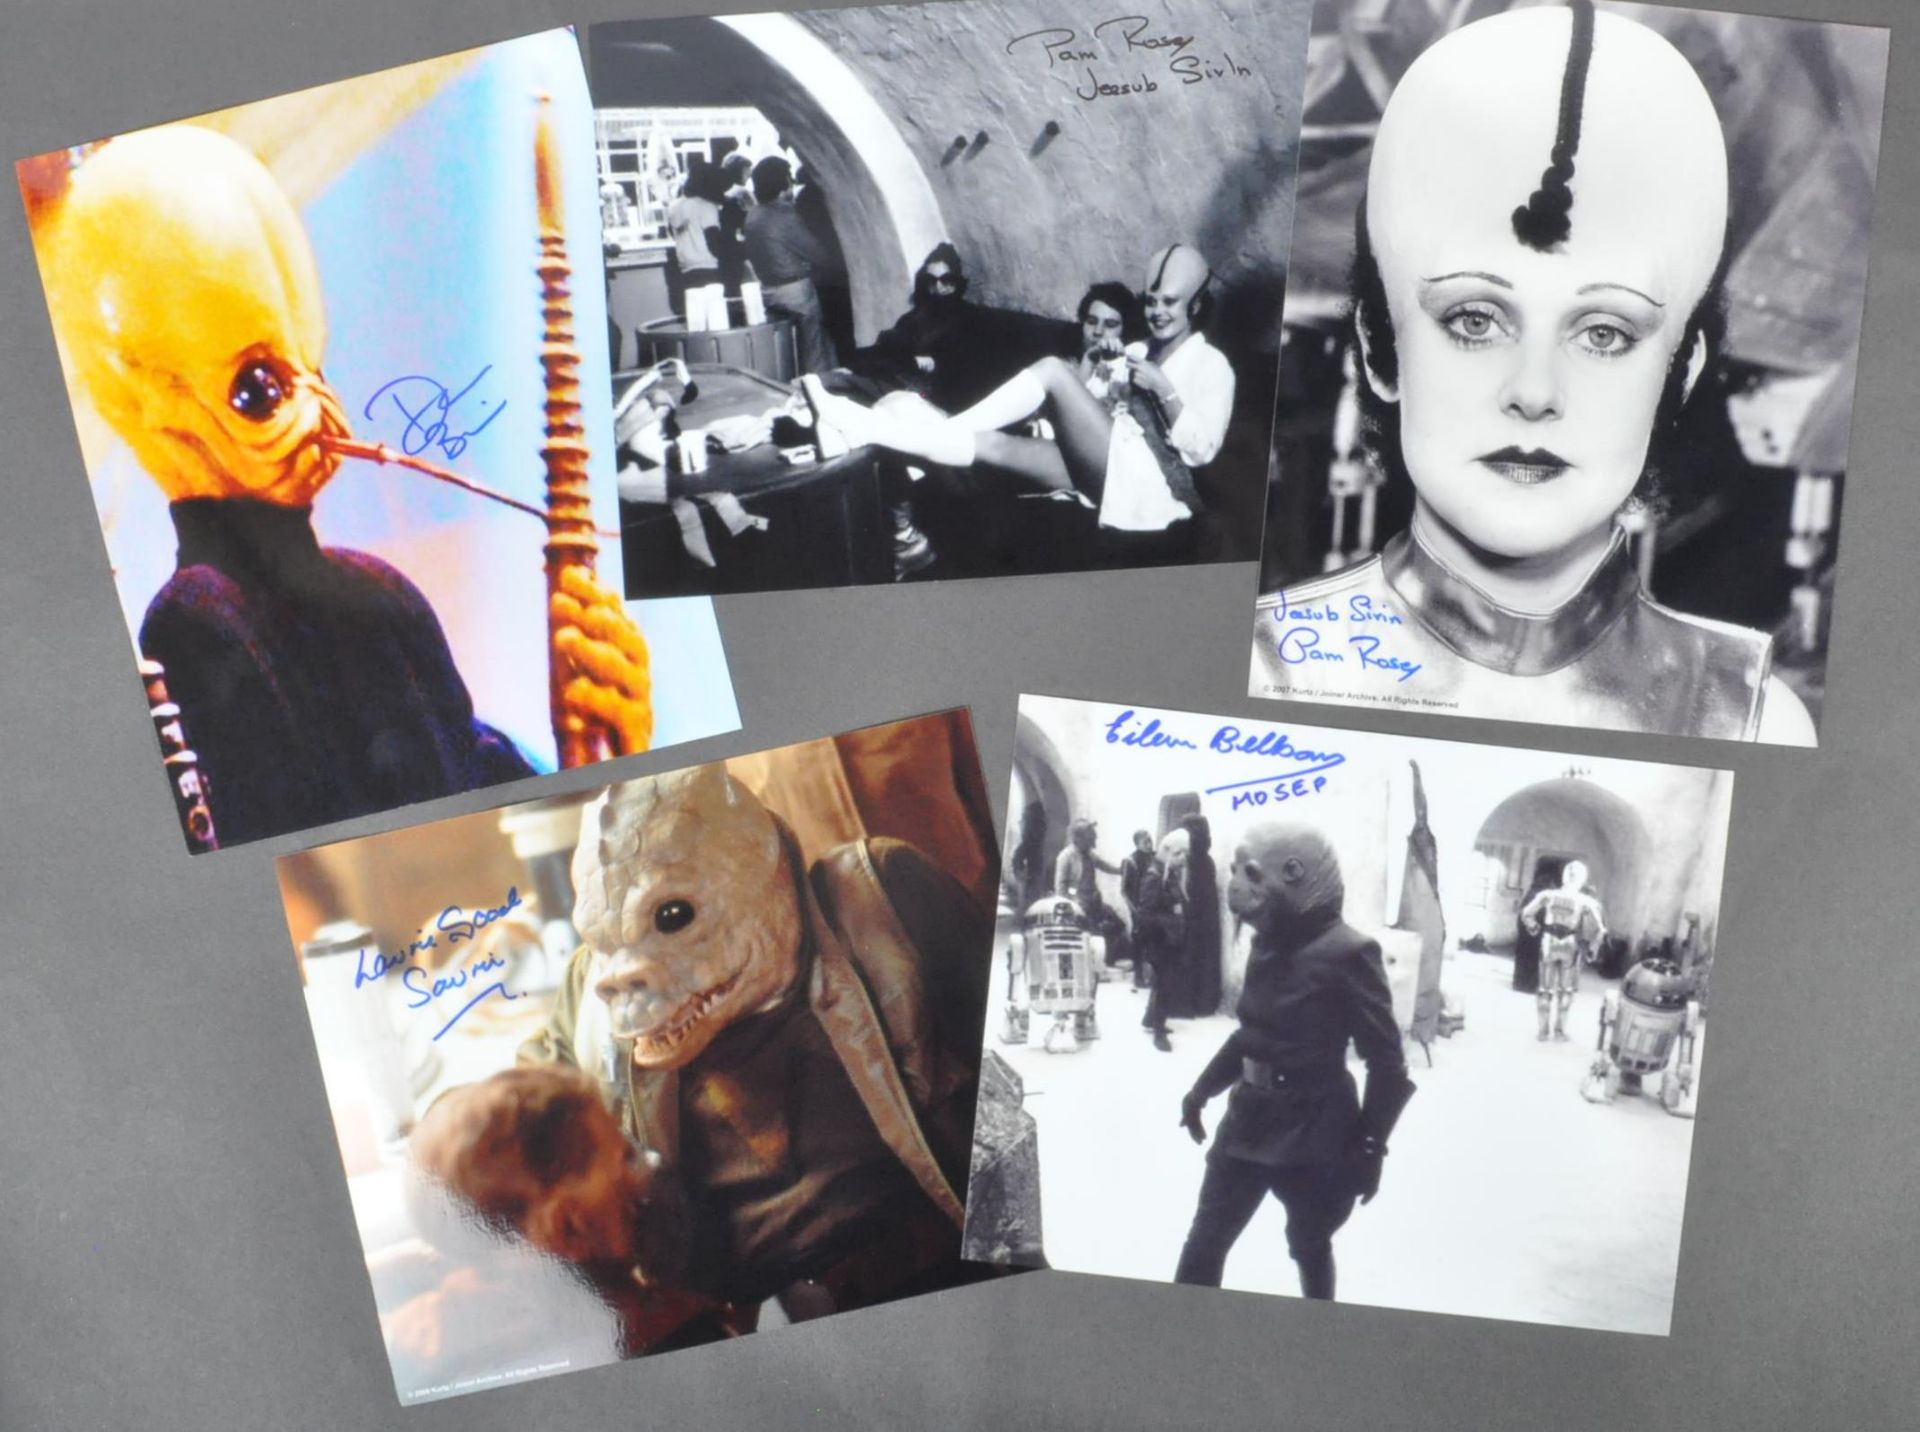 STAR WARS - A NEW HOPE - ALIEN AUTOGRAPH COLLECTION